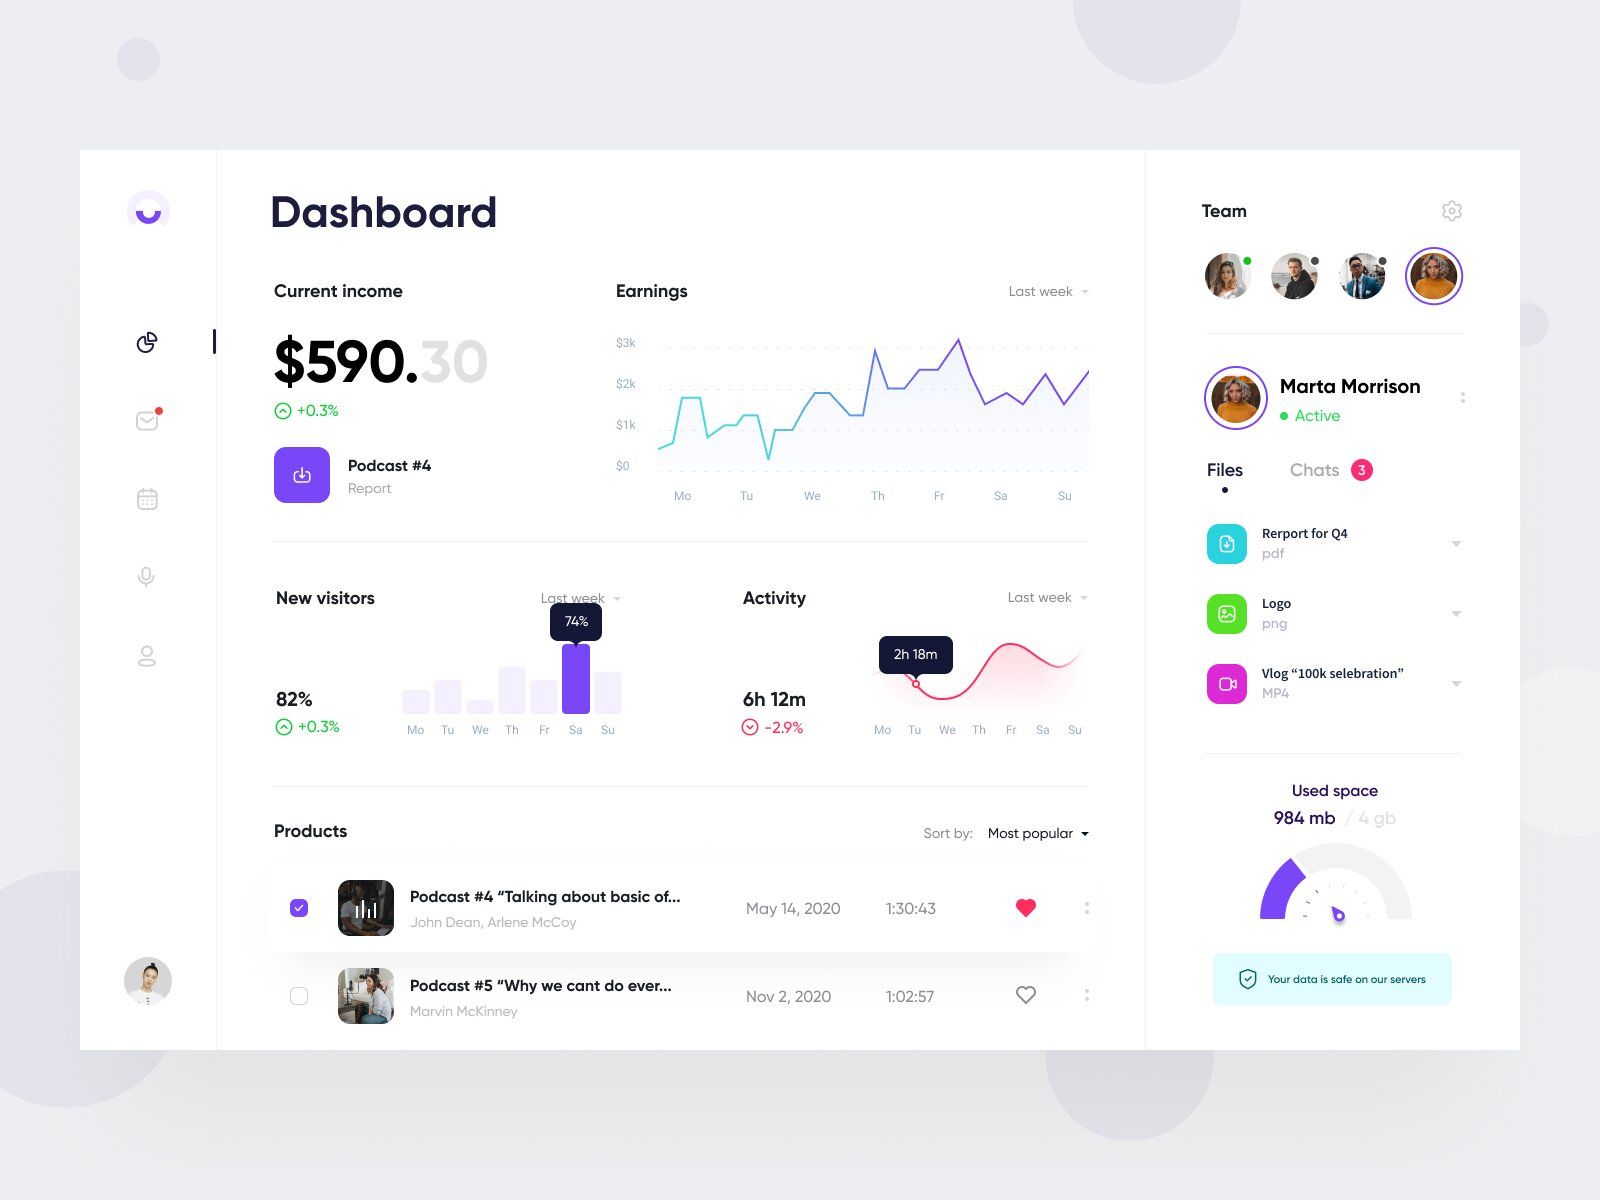 Web-based accounting software can be integrated with your previous accounting system or any other service from 3rd-party providers if you’ve opted for a custom accounting solution from a software development compan (*image by [Alexey Savitskiy](https://dribbble.com/alexey_savitskiy){ rel="nofollow" target="_blank" .default-md}*)